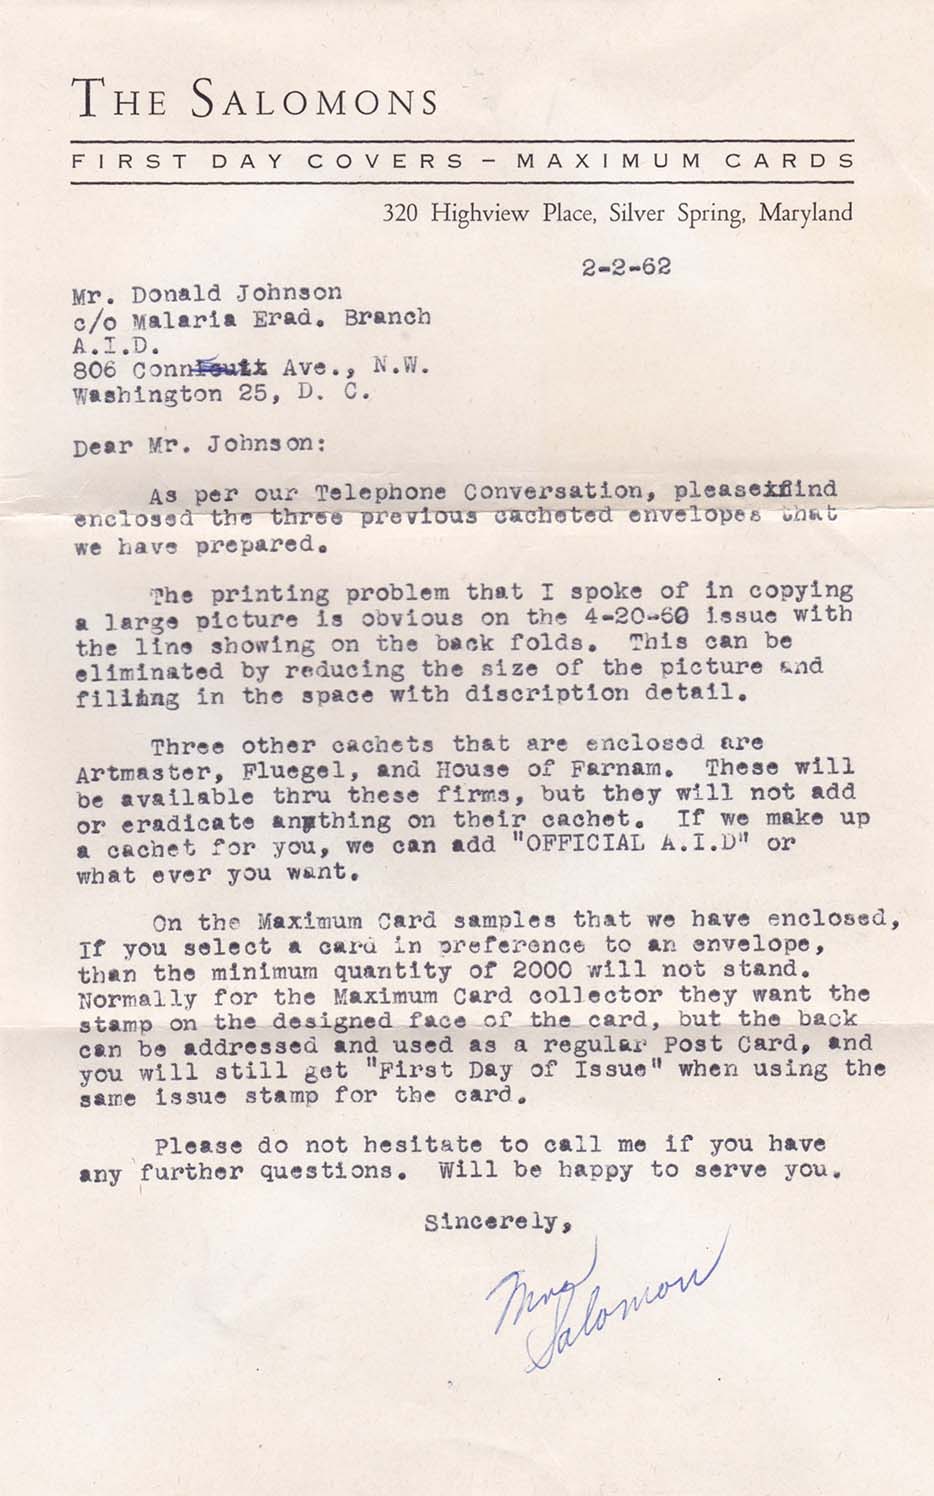 Letter To Donald R Johnson About Creating FDCs